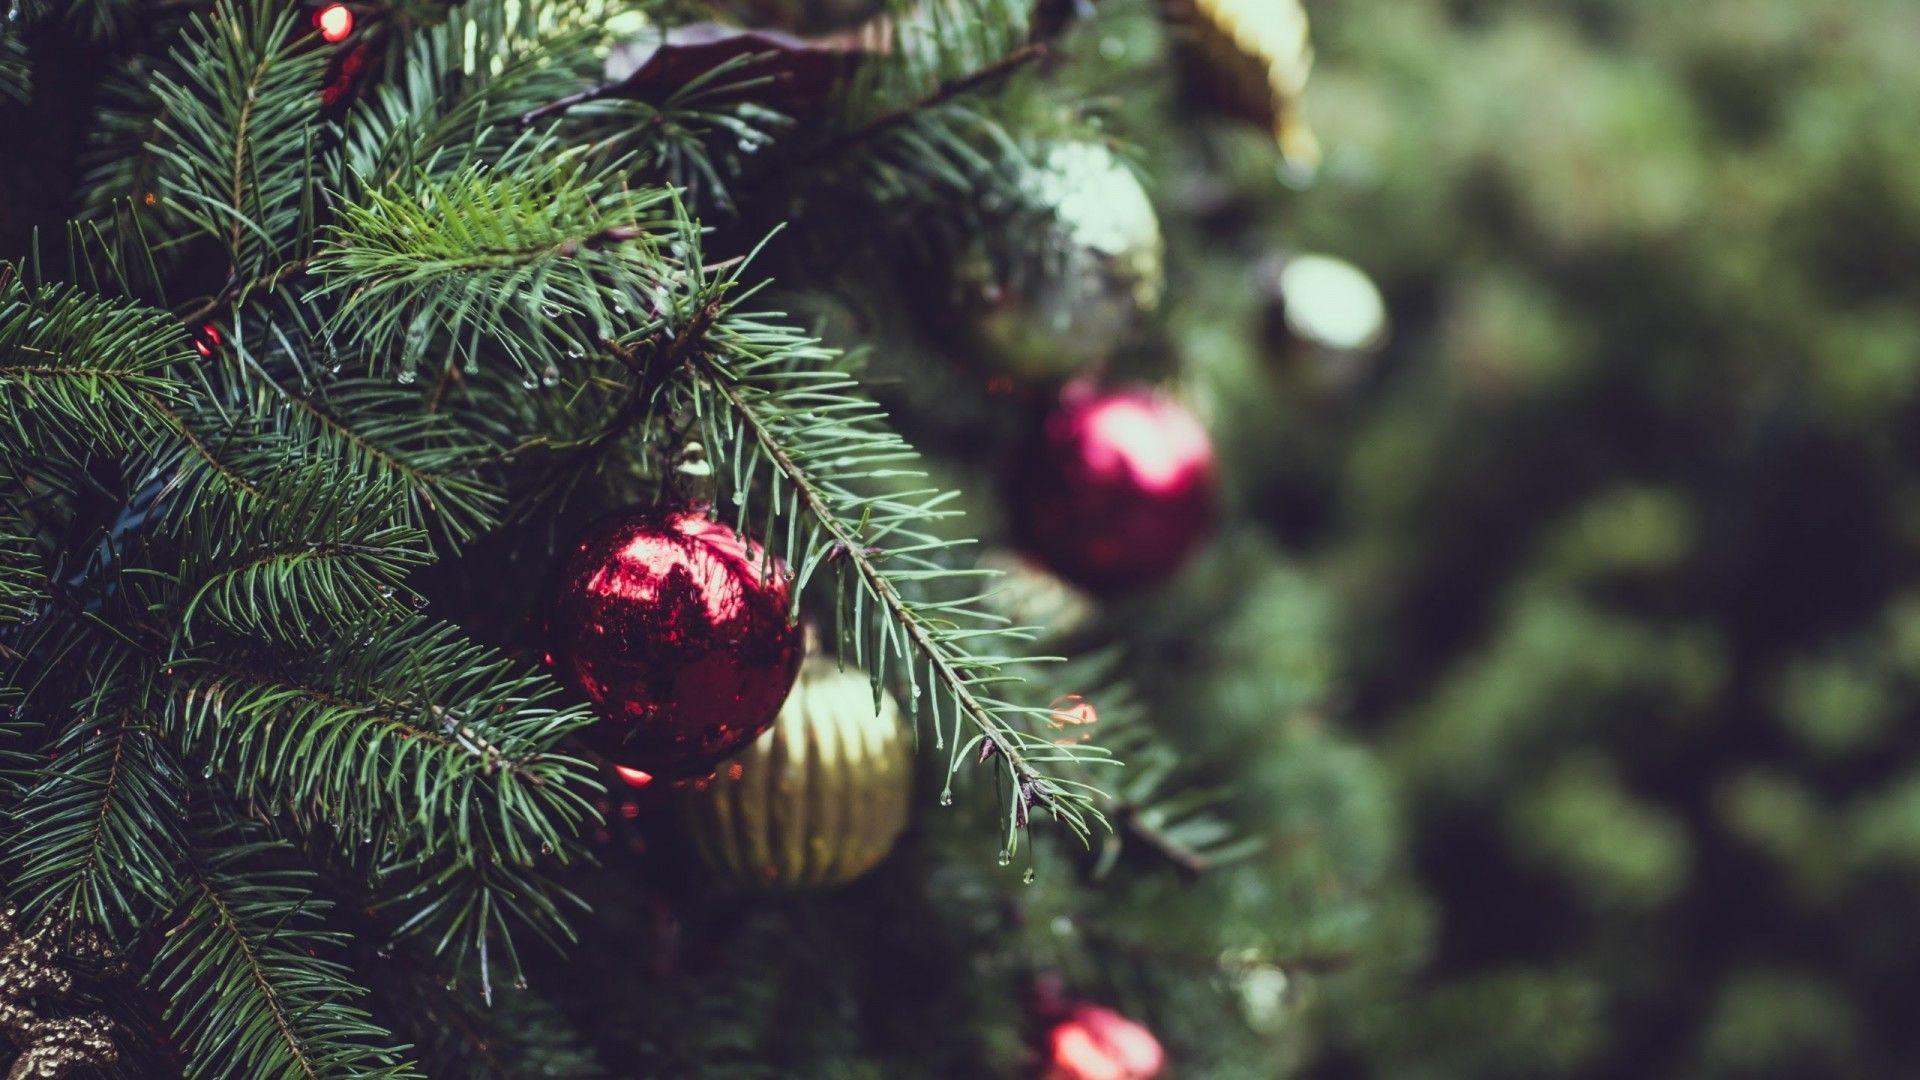 Download 1920x1080 Christmas Tree, Ornaments, Close Up, Blurred